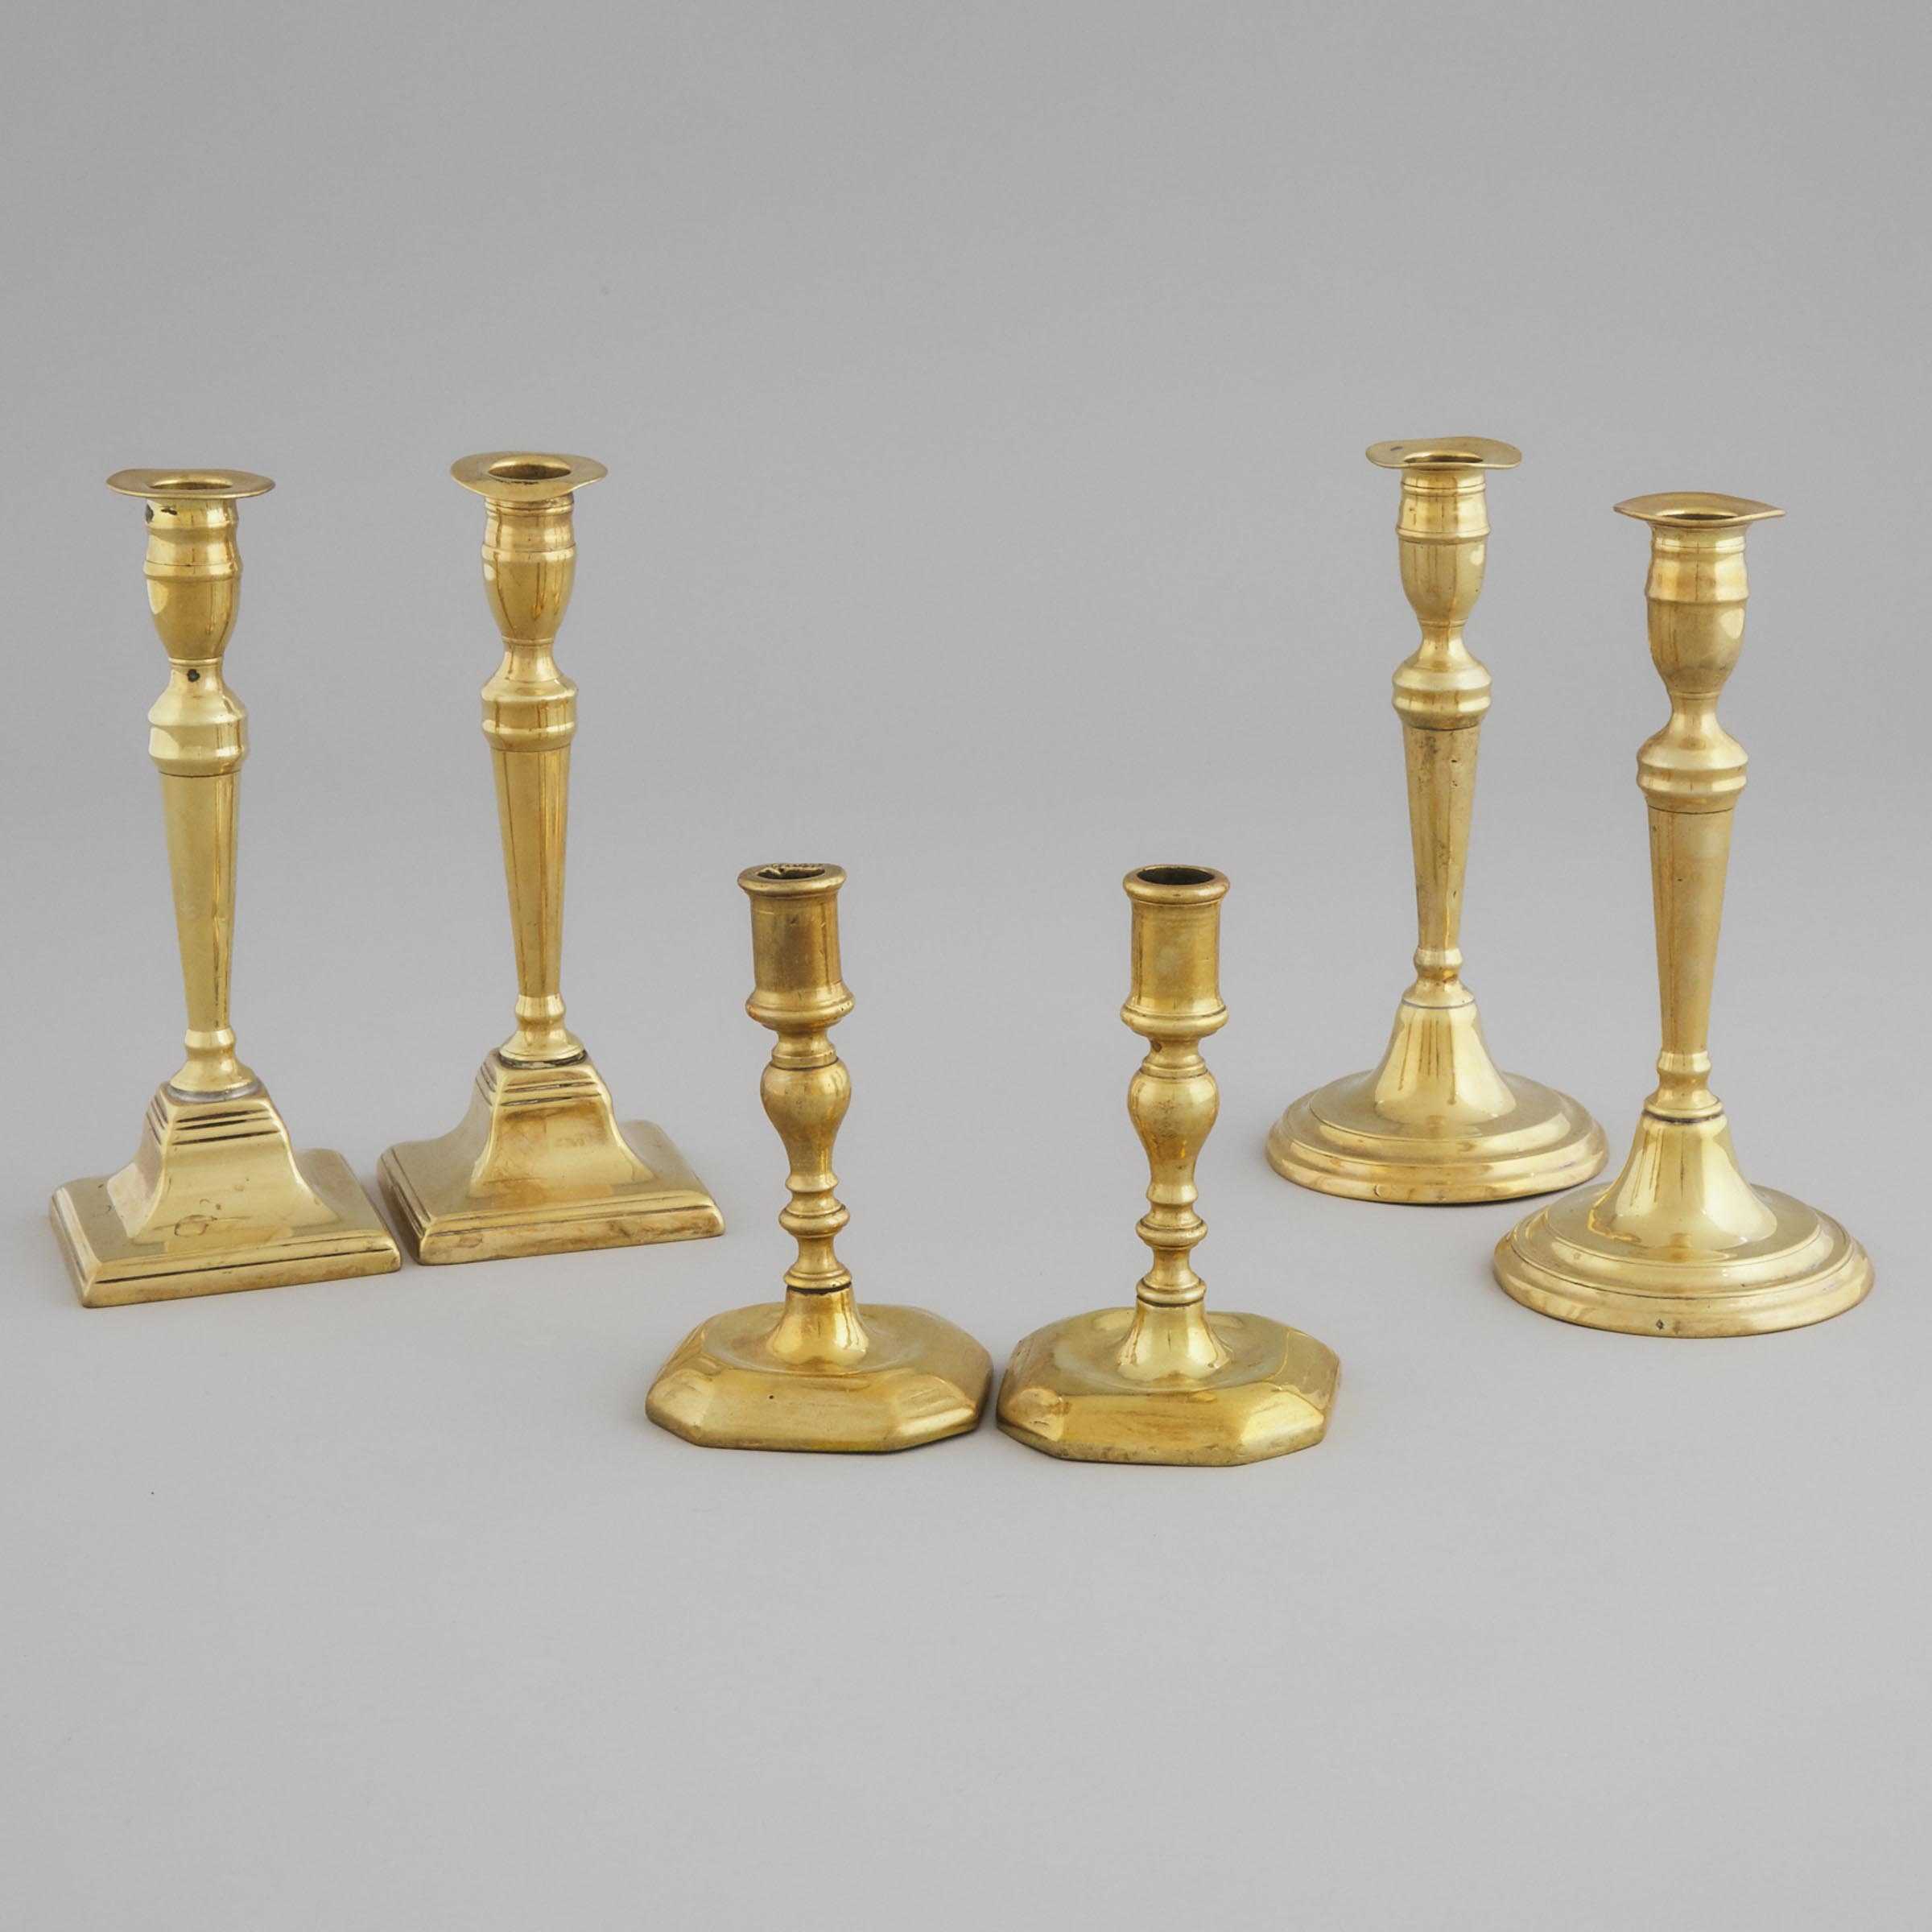 Three Pairs of English Brass Candlesticks, early 18th - early 19th centuries